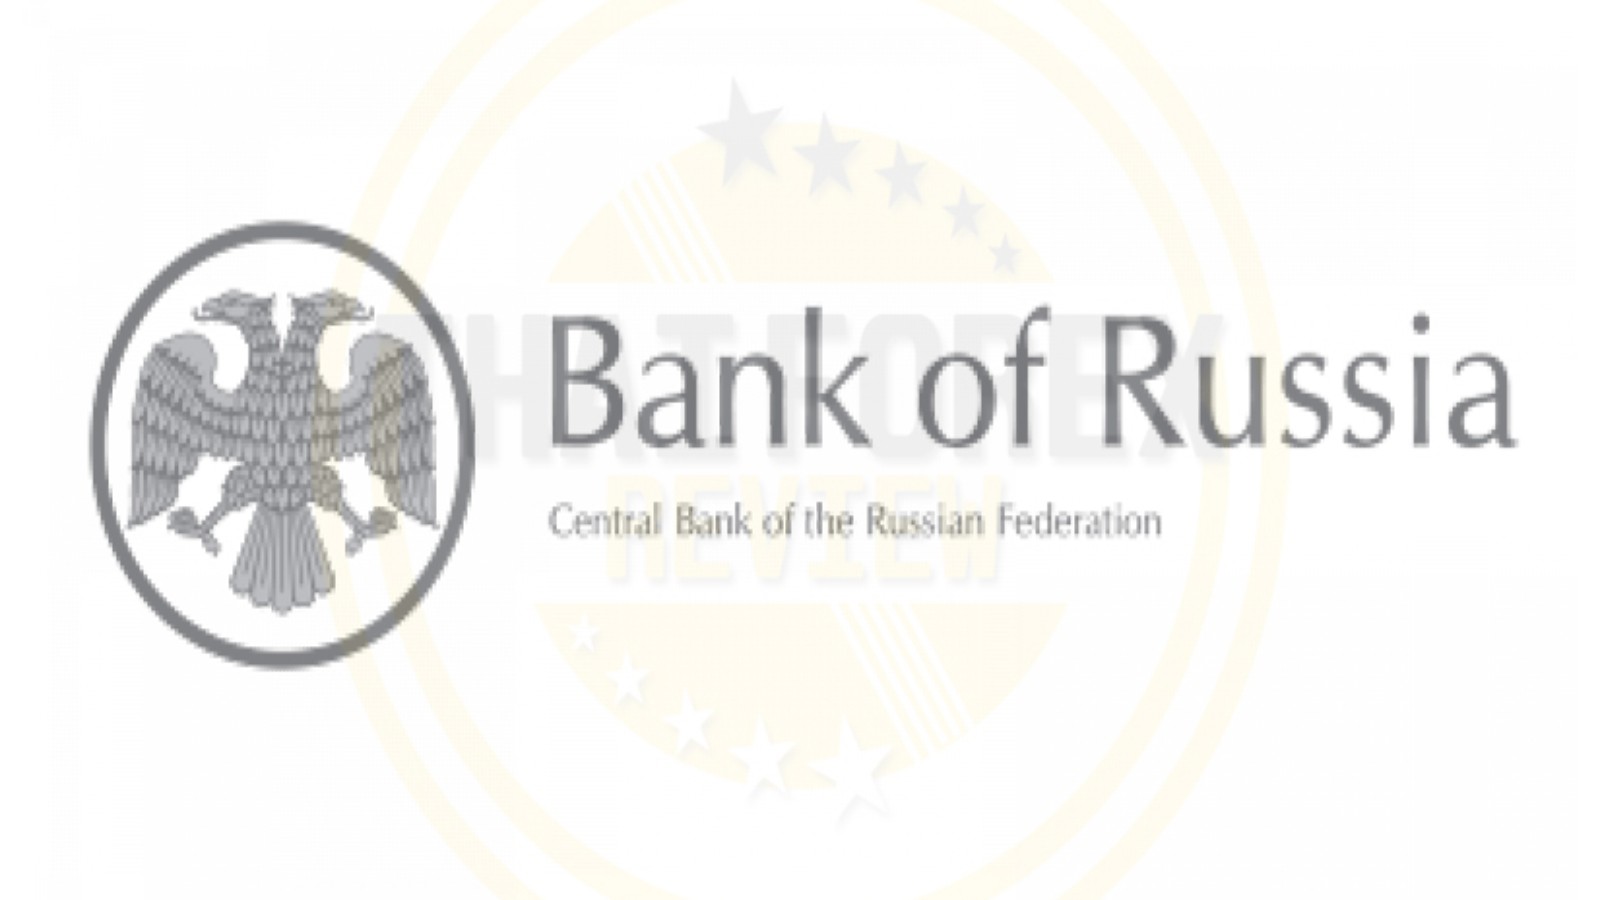 CBR (Central Bank of Russia)